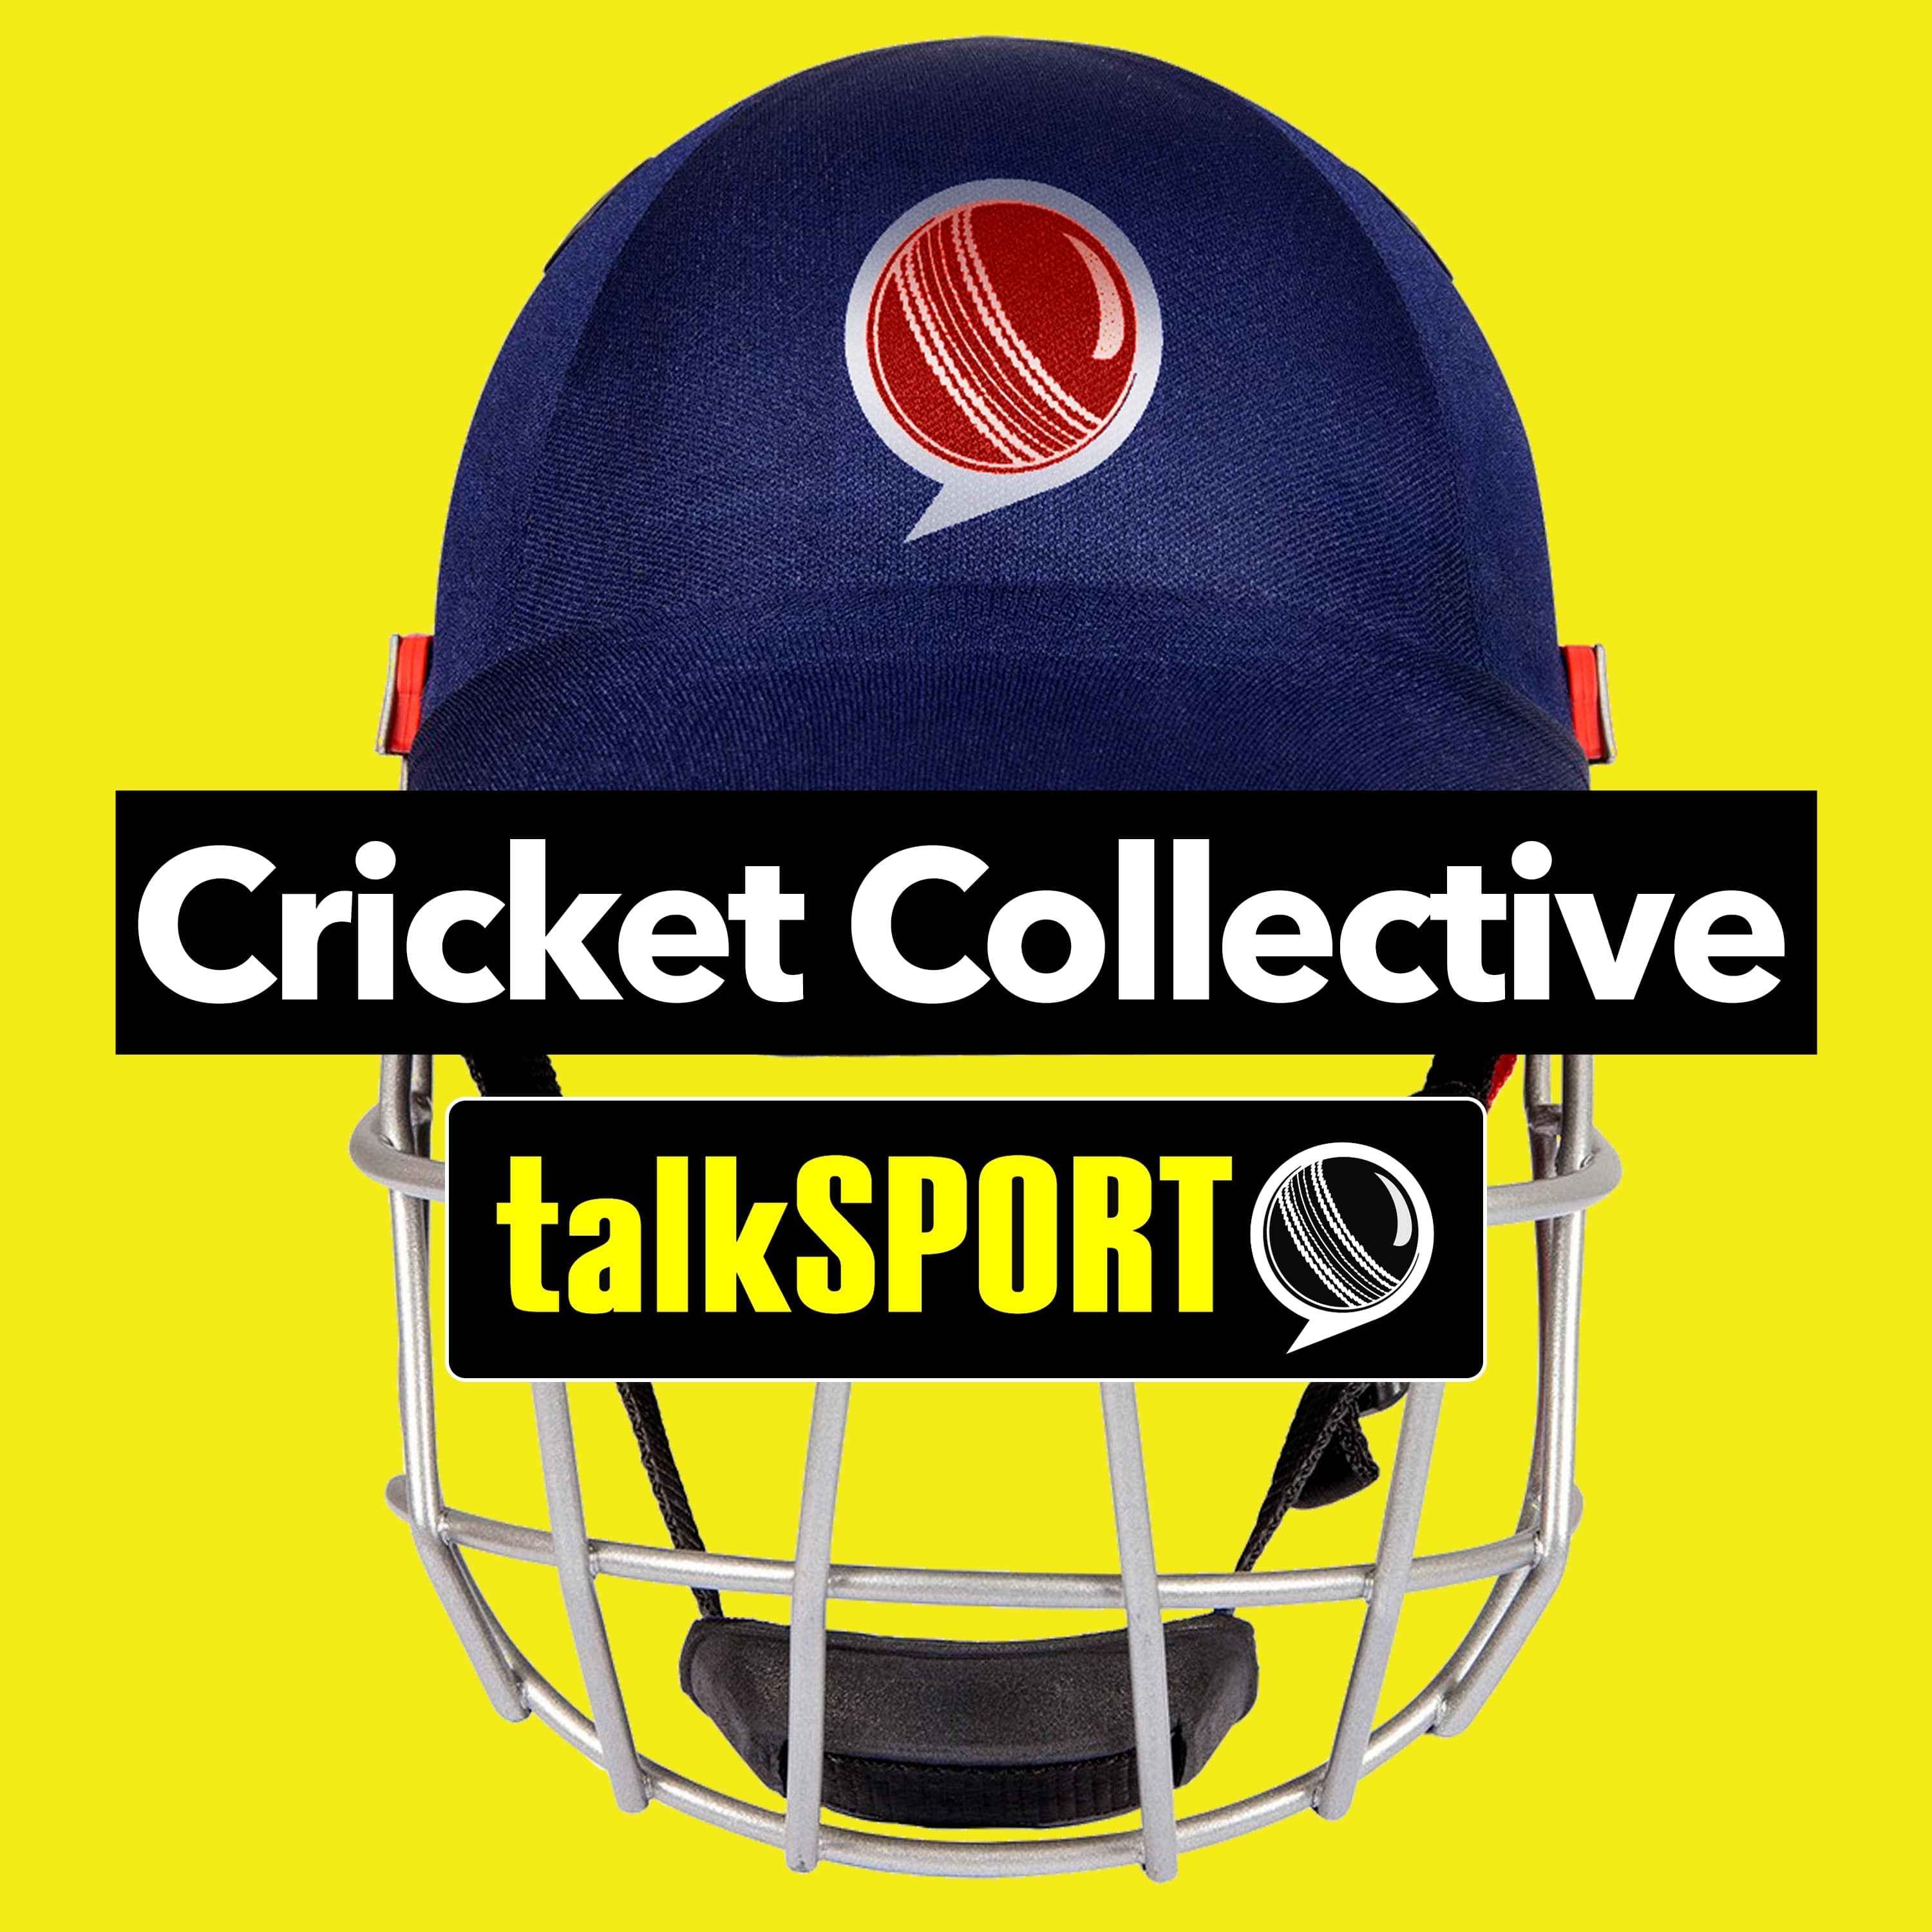 The Cricket Collective - Are England On The Verge Of Crisis & Cath Dalton Makes PSL History